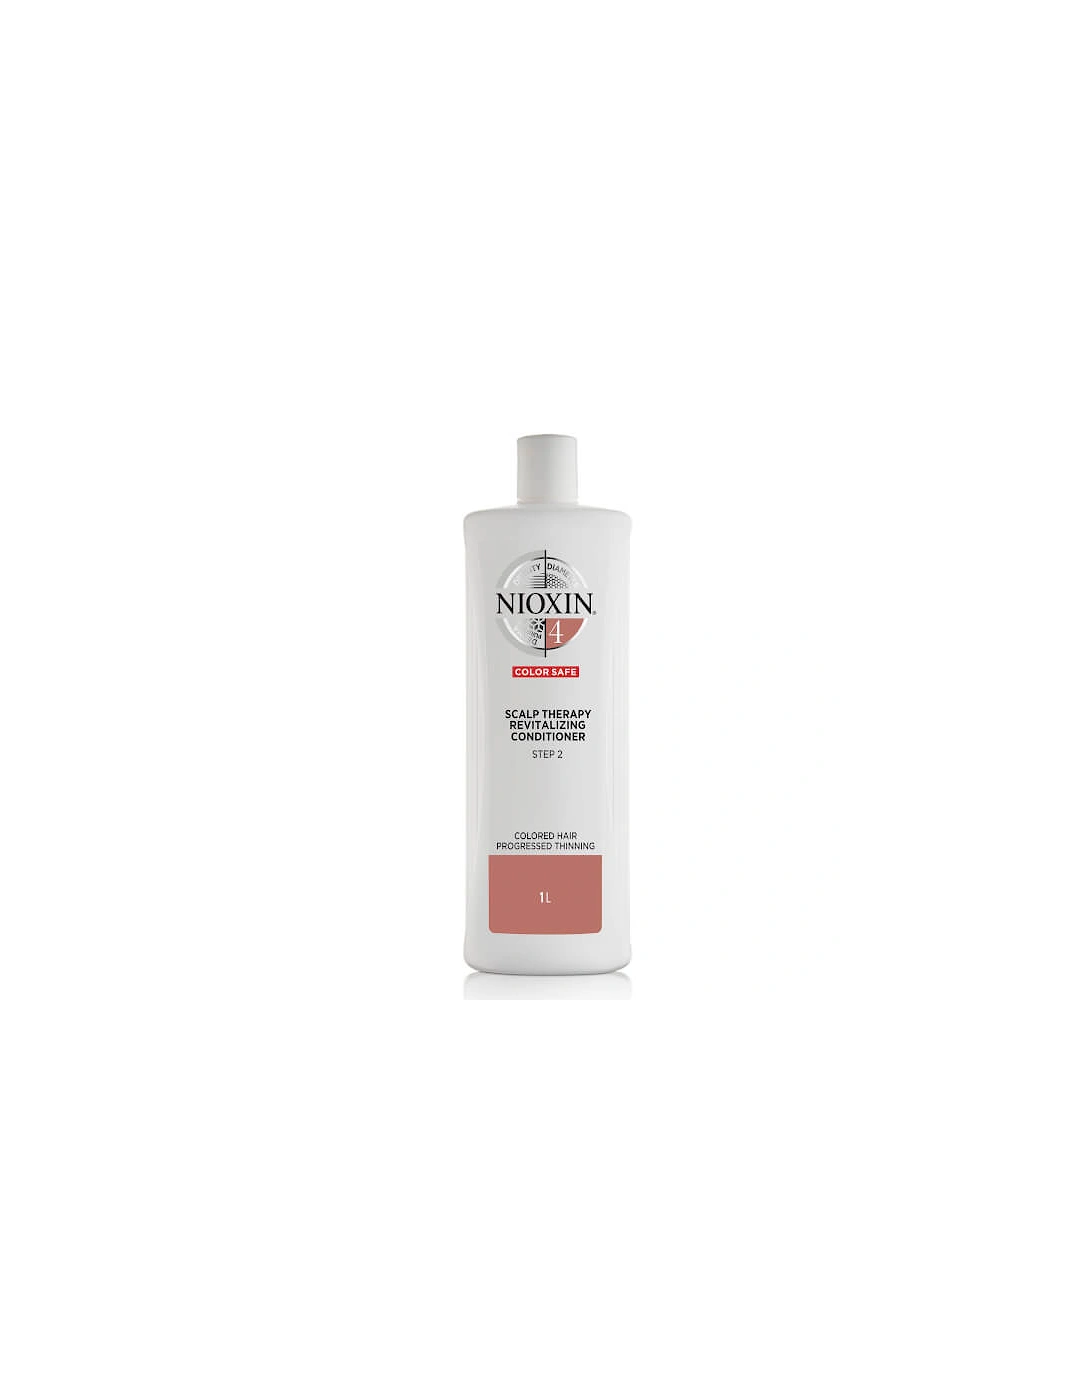 3-Part System 4 Scalp Therapy Revitalising Conditioner for Coloured Hair with Progressed Thinning 1000ml, 2 of 1